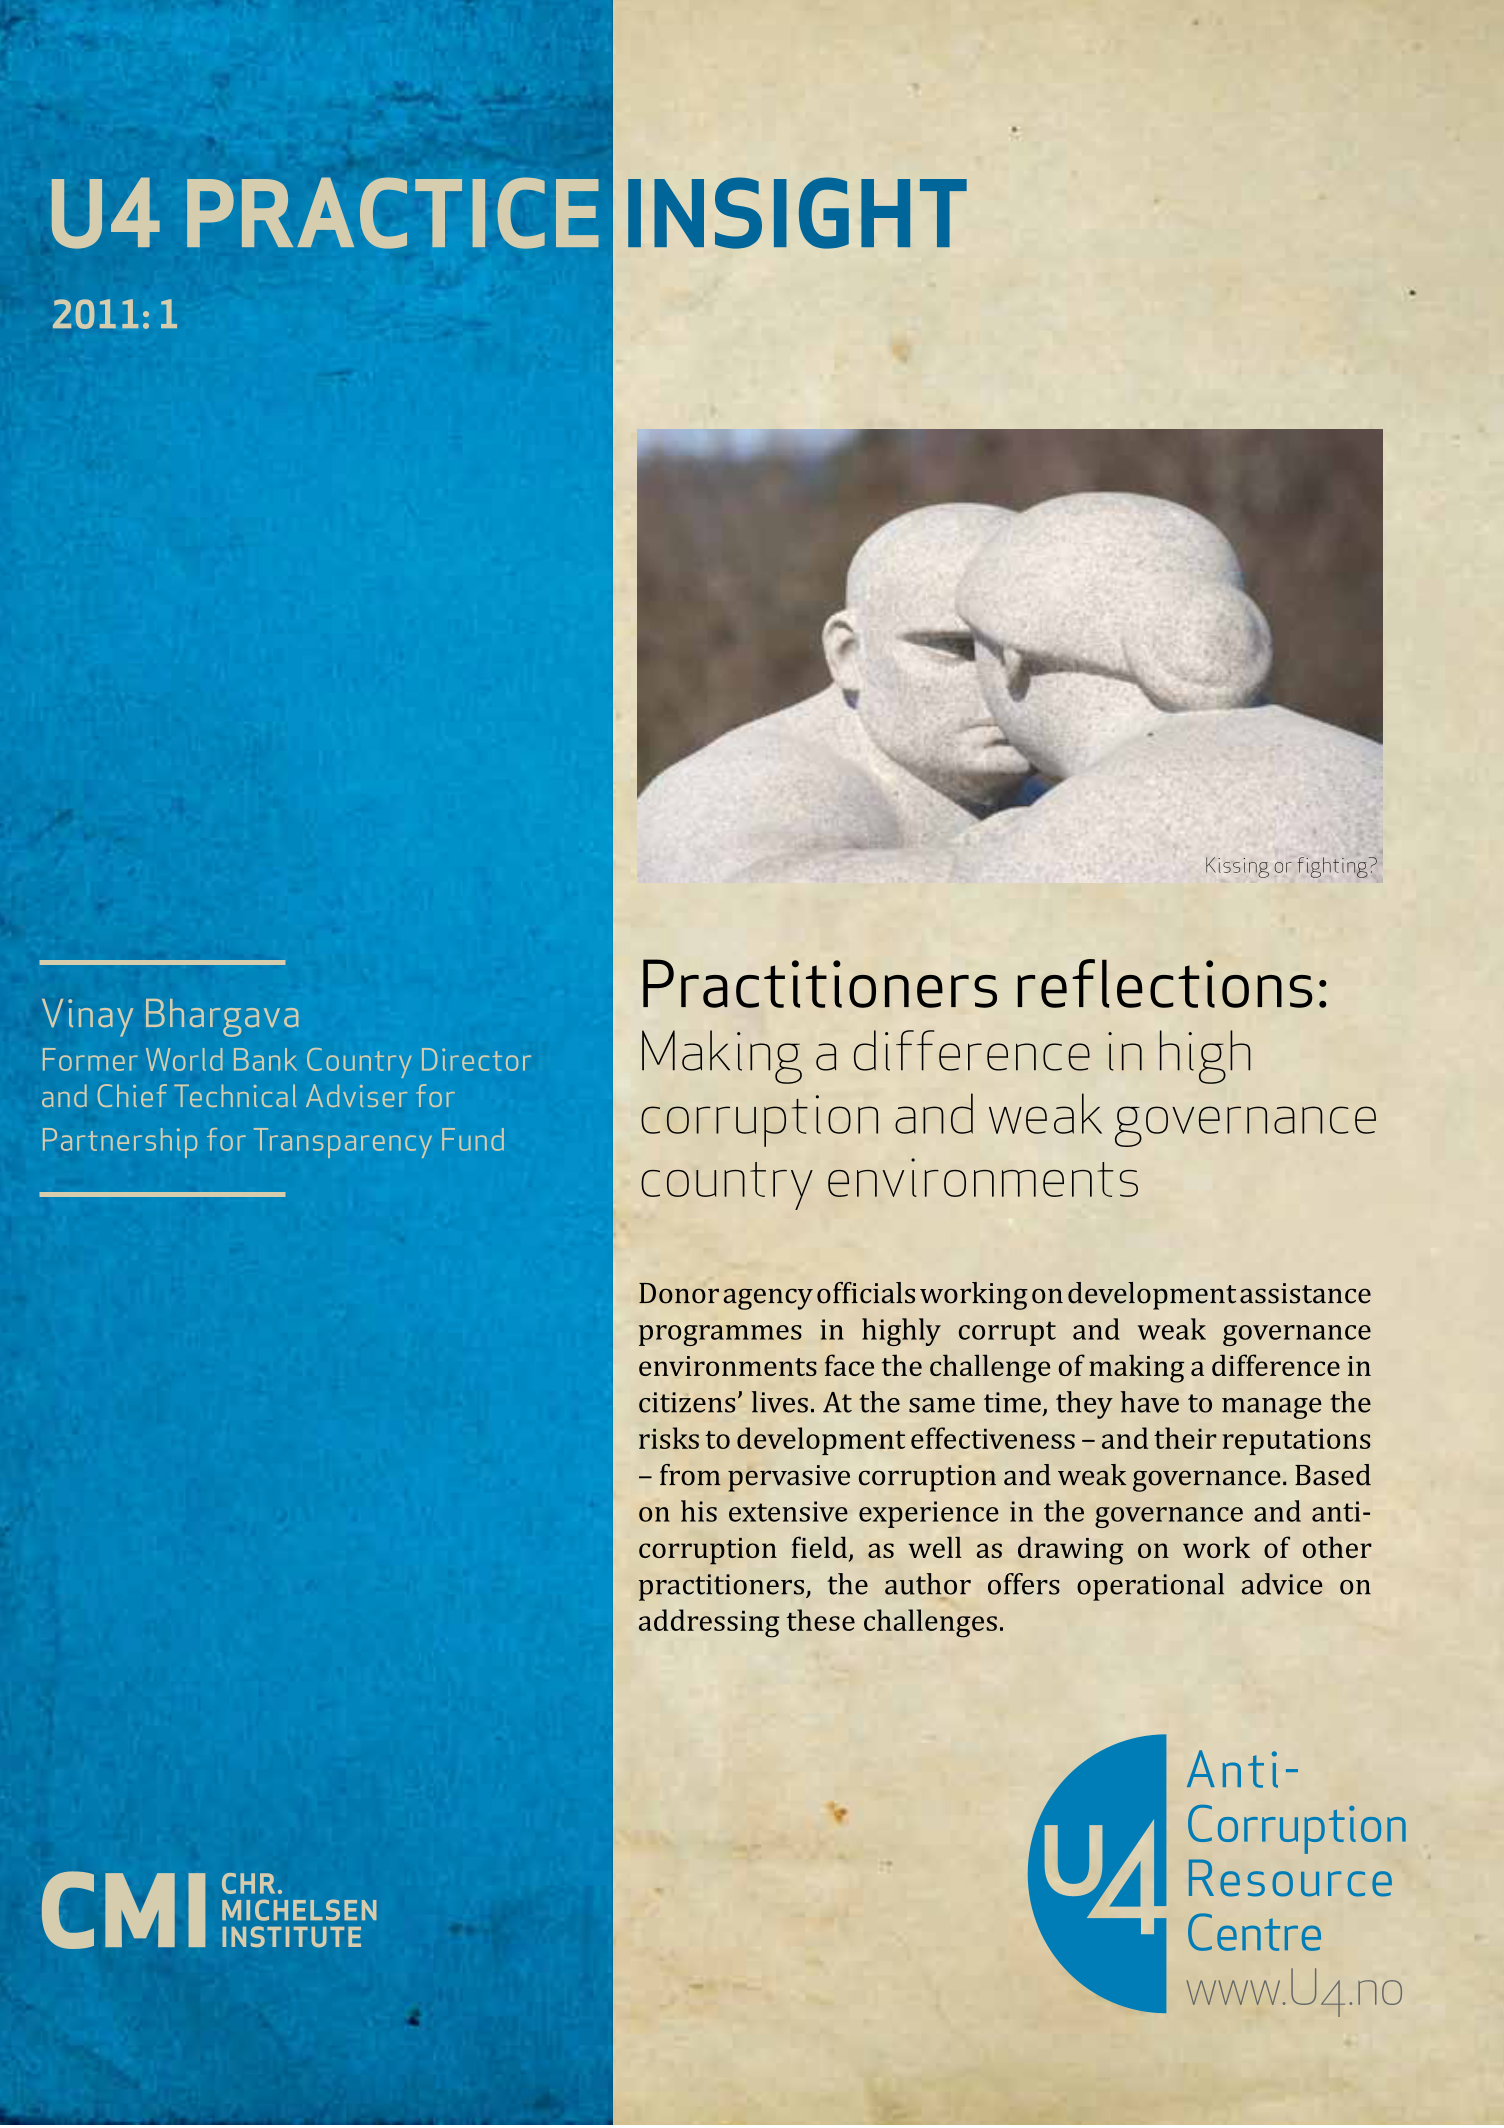 Practitioners reflections: Making a difference in high corruption and weak governance country environments